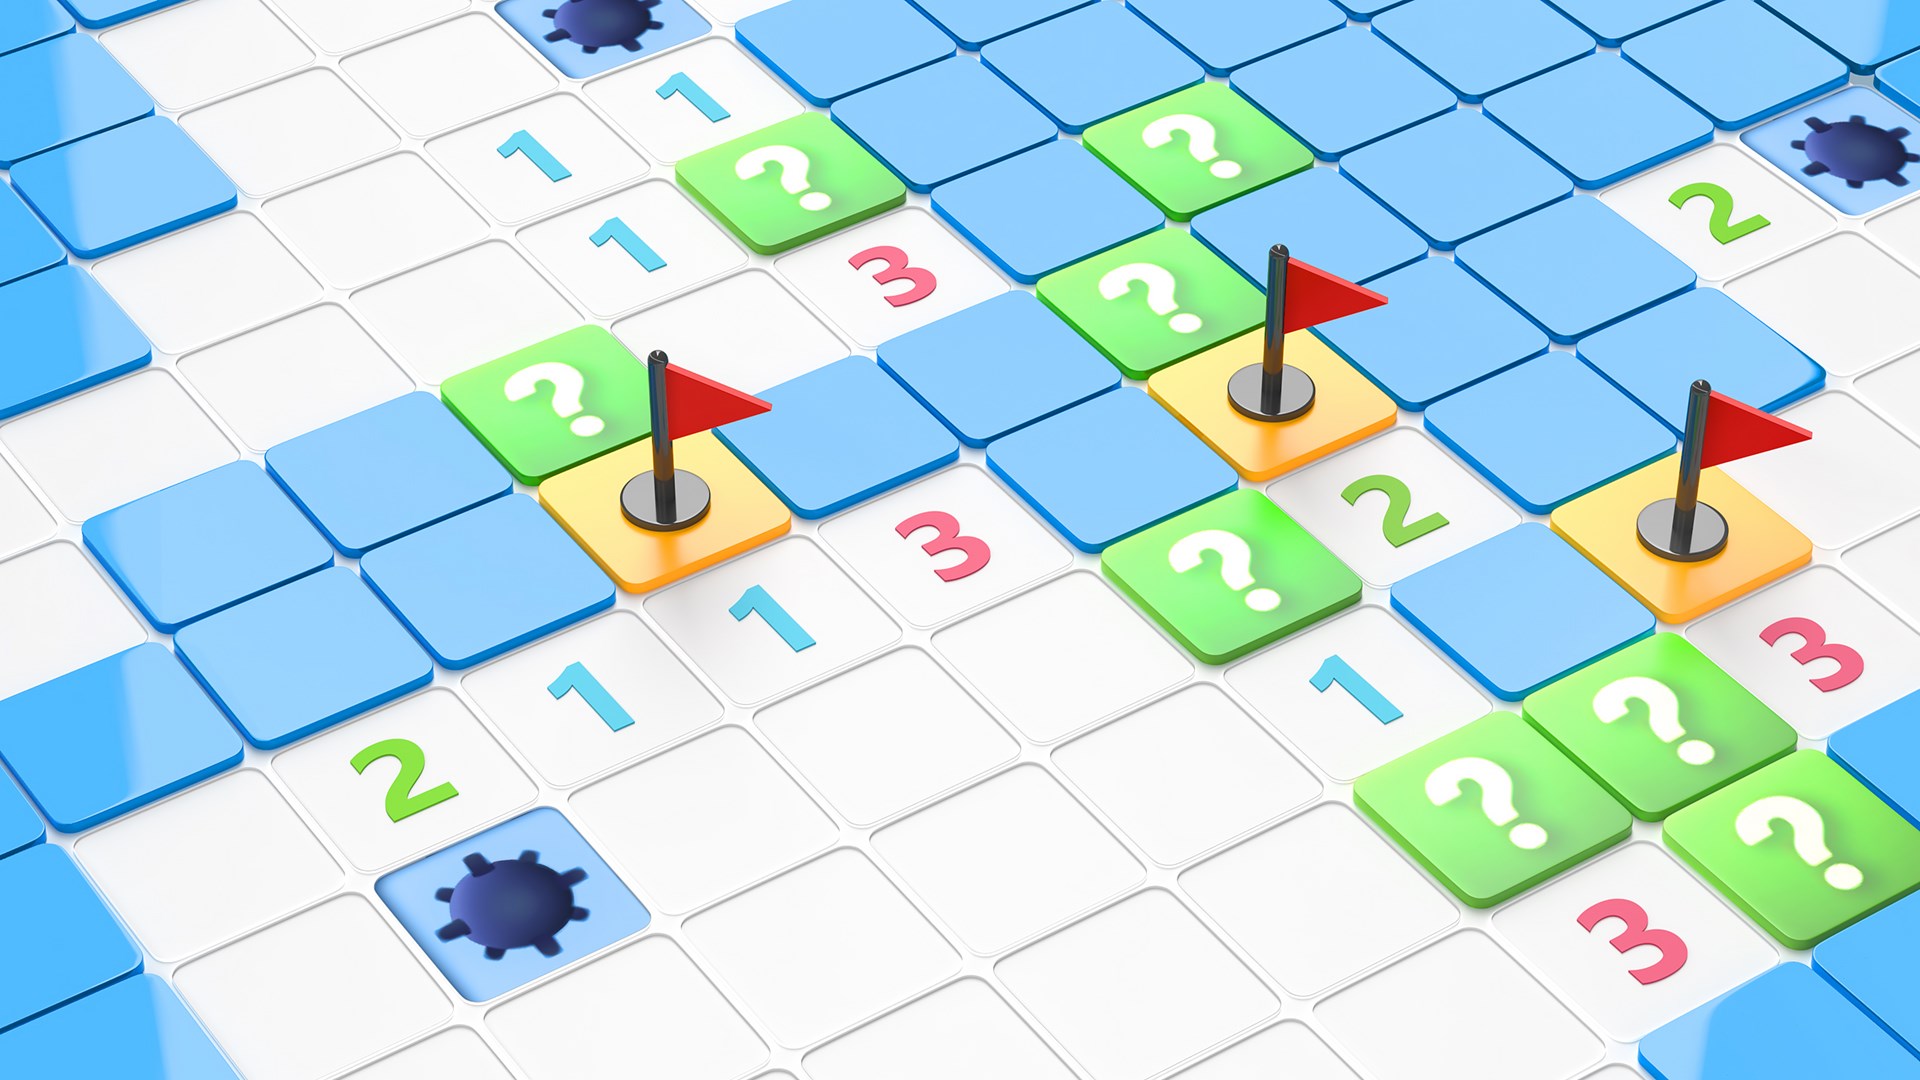 Get back the classic Solitaire and Minesweeper on Windows 11/10